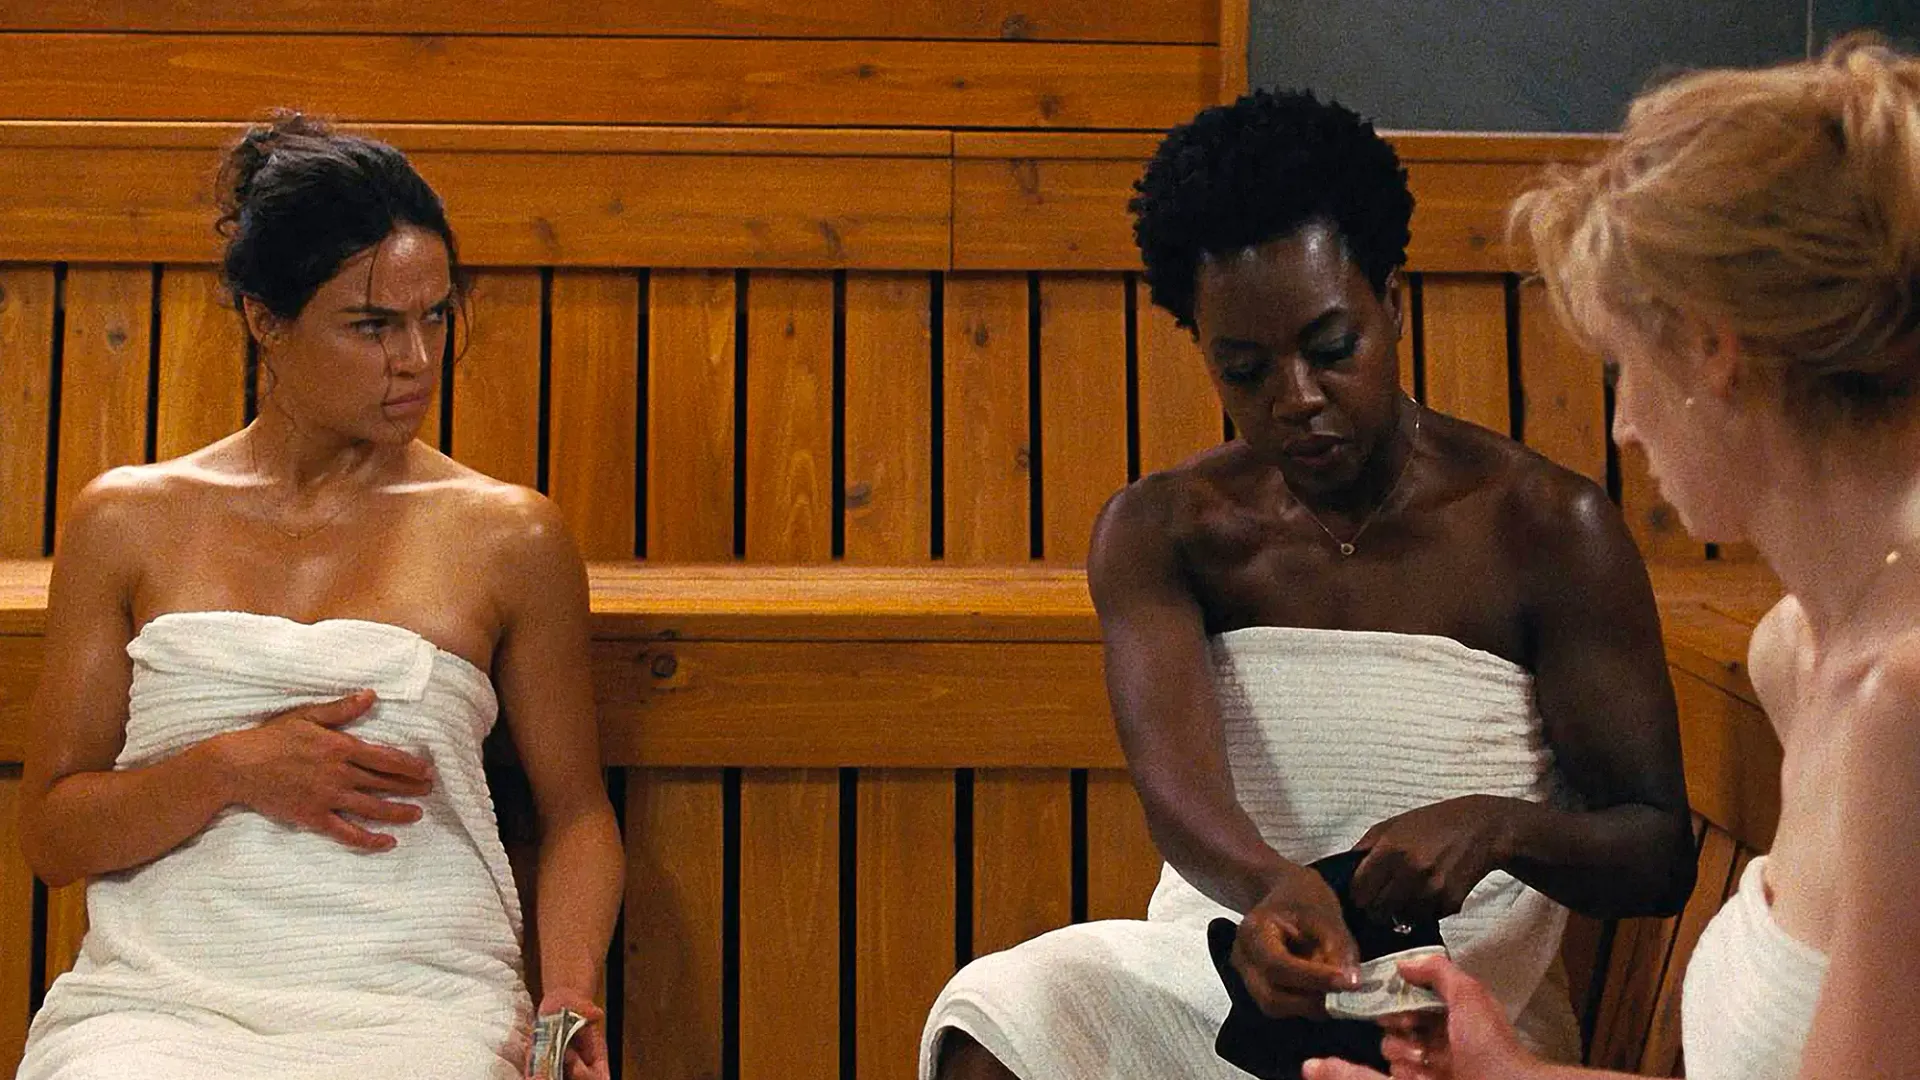 A scene from the movie “Widows”